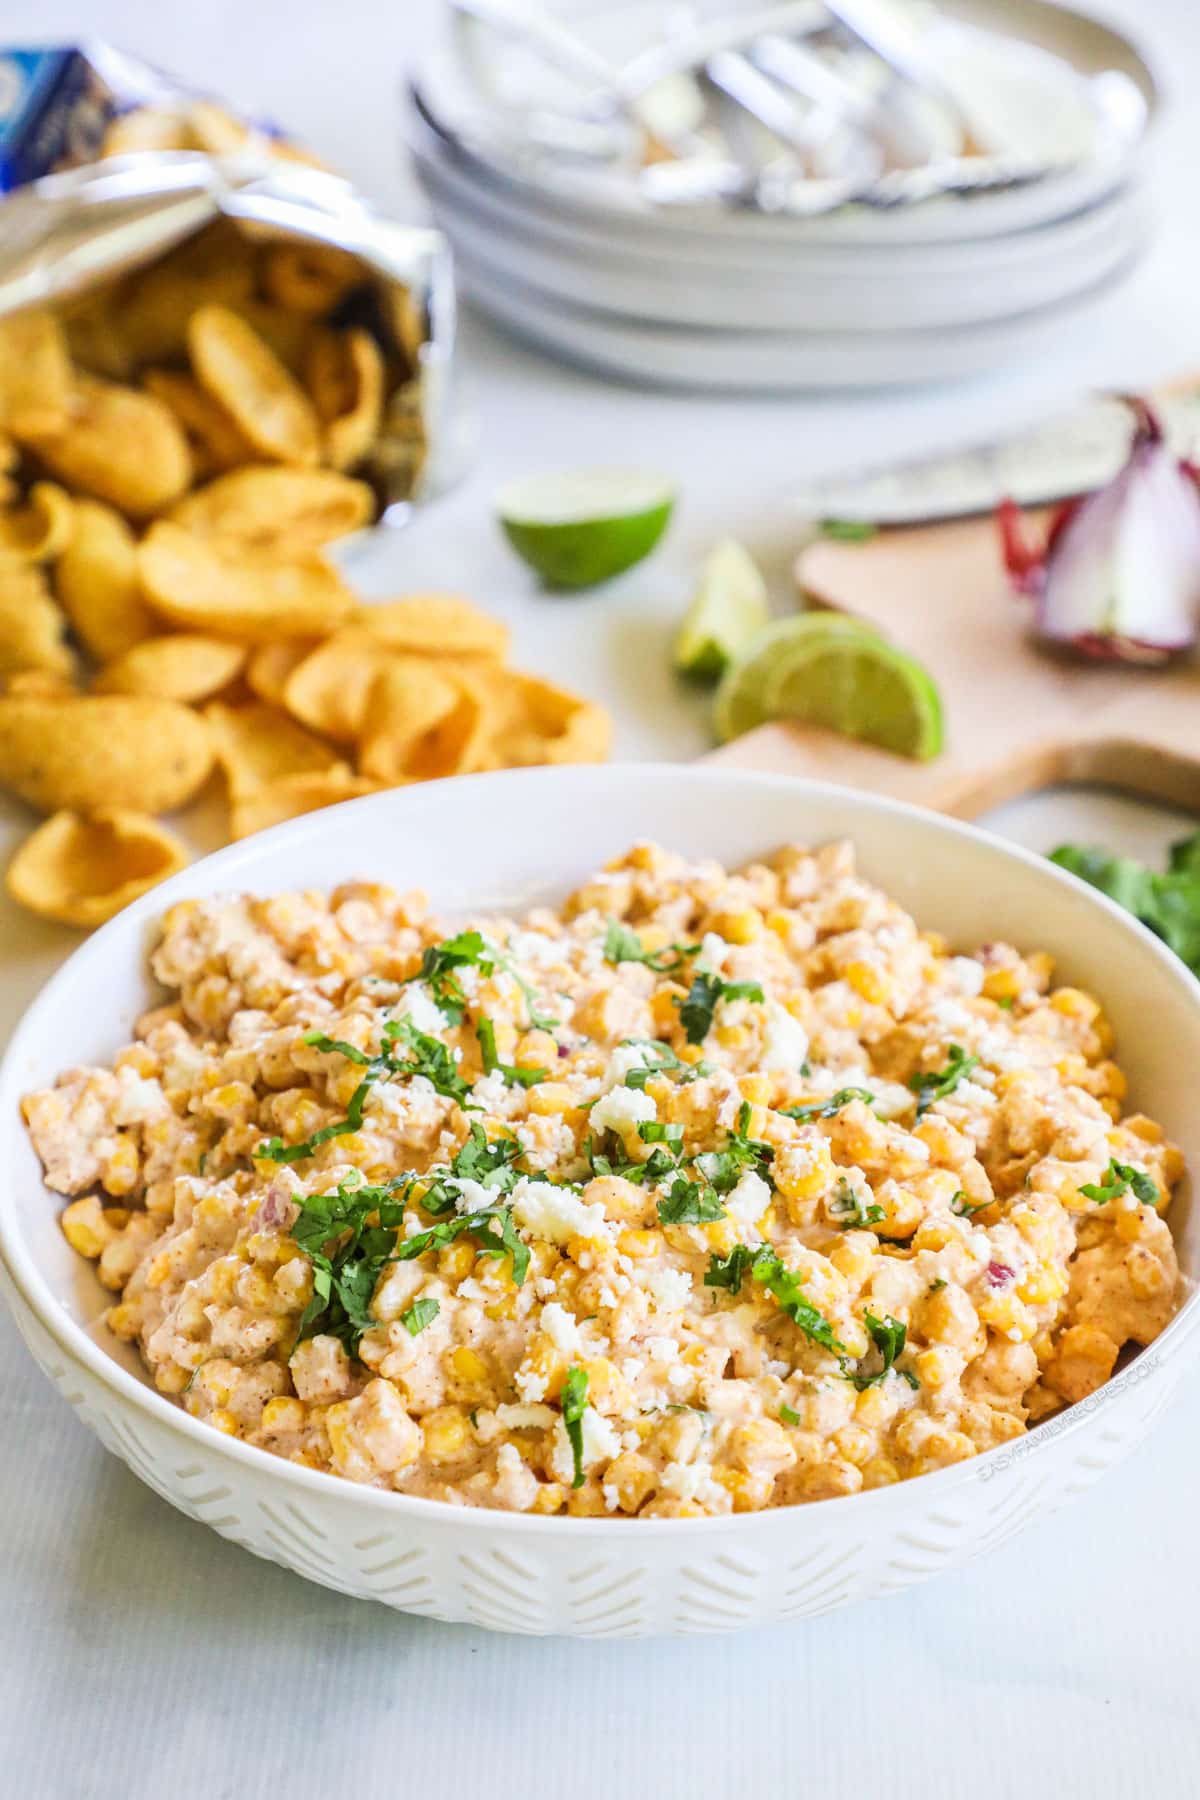 Mexican street corn dip in a serving bowl garnished with cheese and cilantro. Open bag of frito chips and lime wedges nearby.